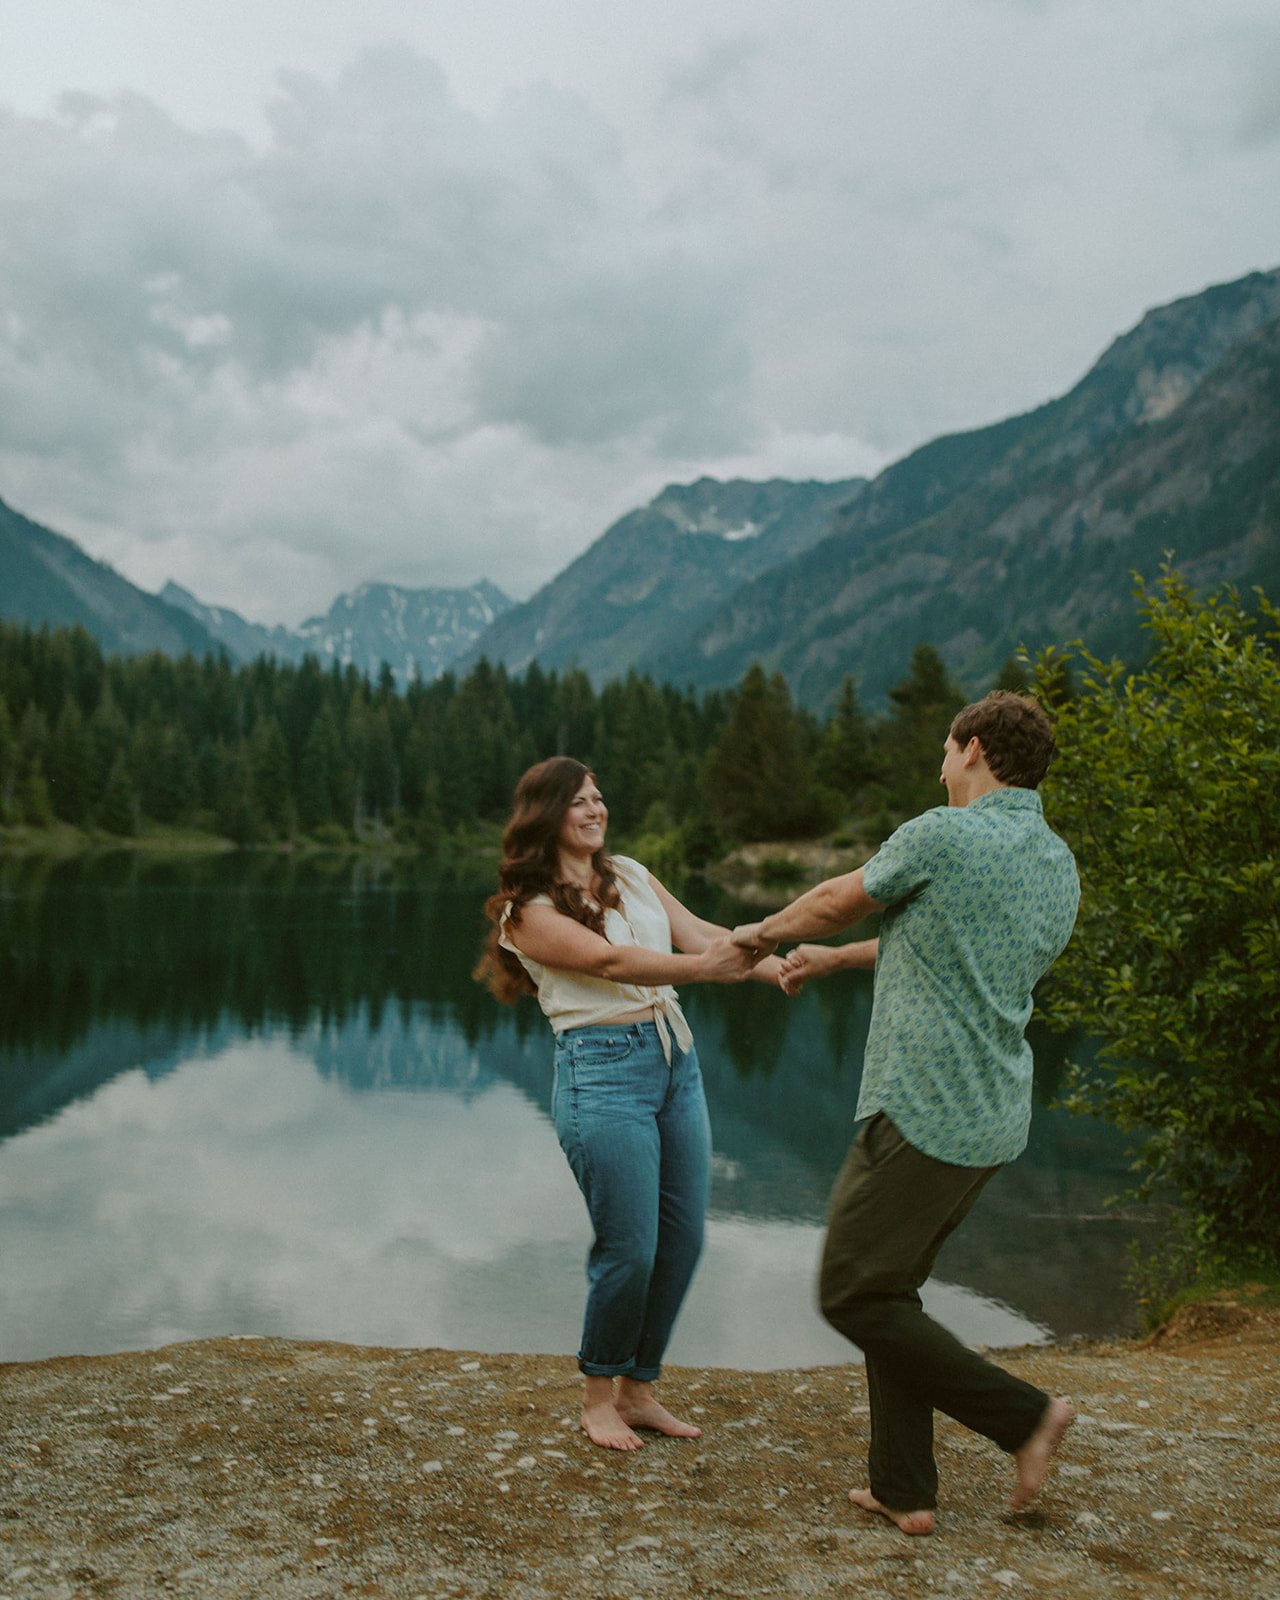 A Gold Creek Pond Outdoor Engagement Session - Shanean + Ian (120).jpg